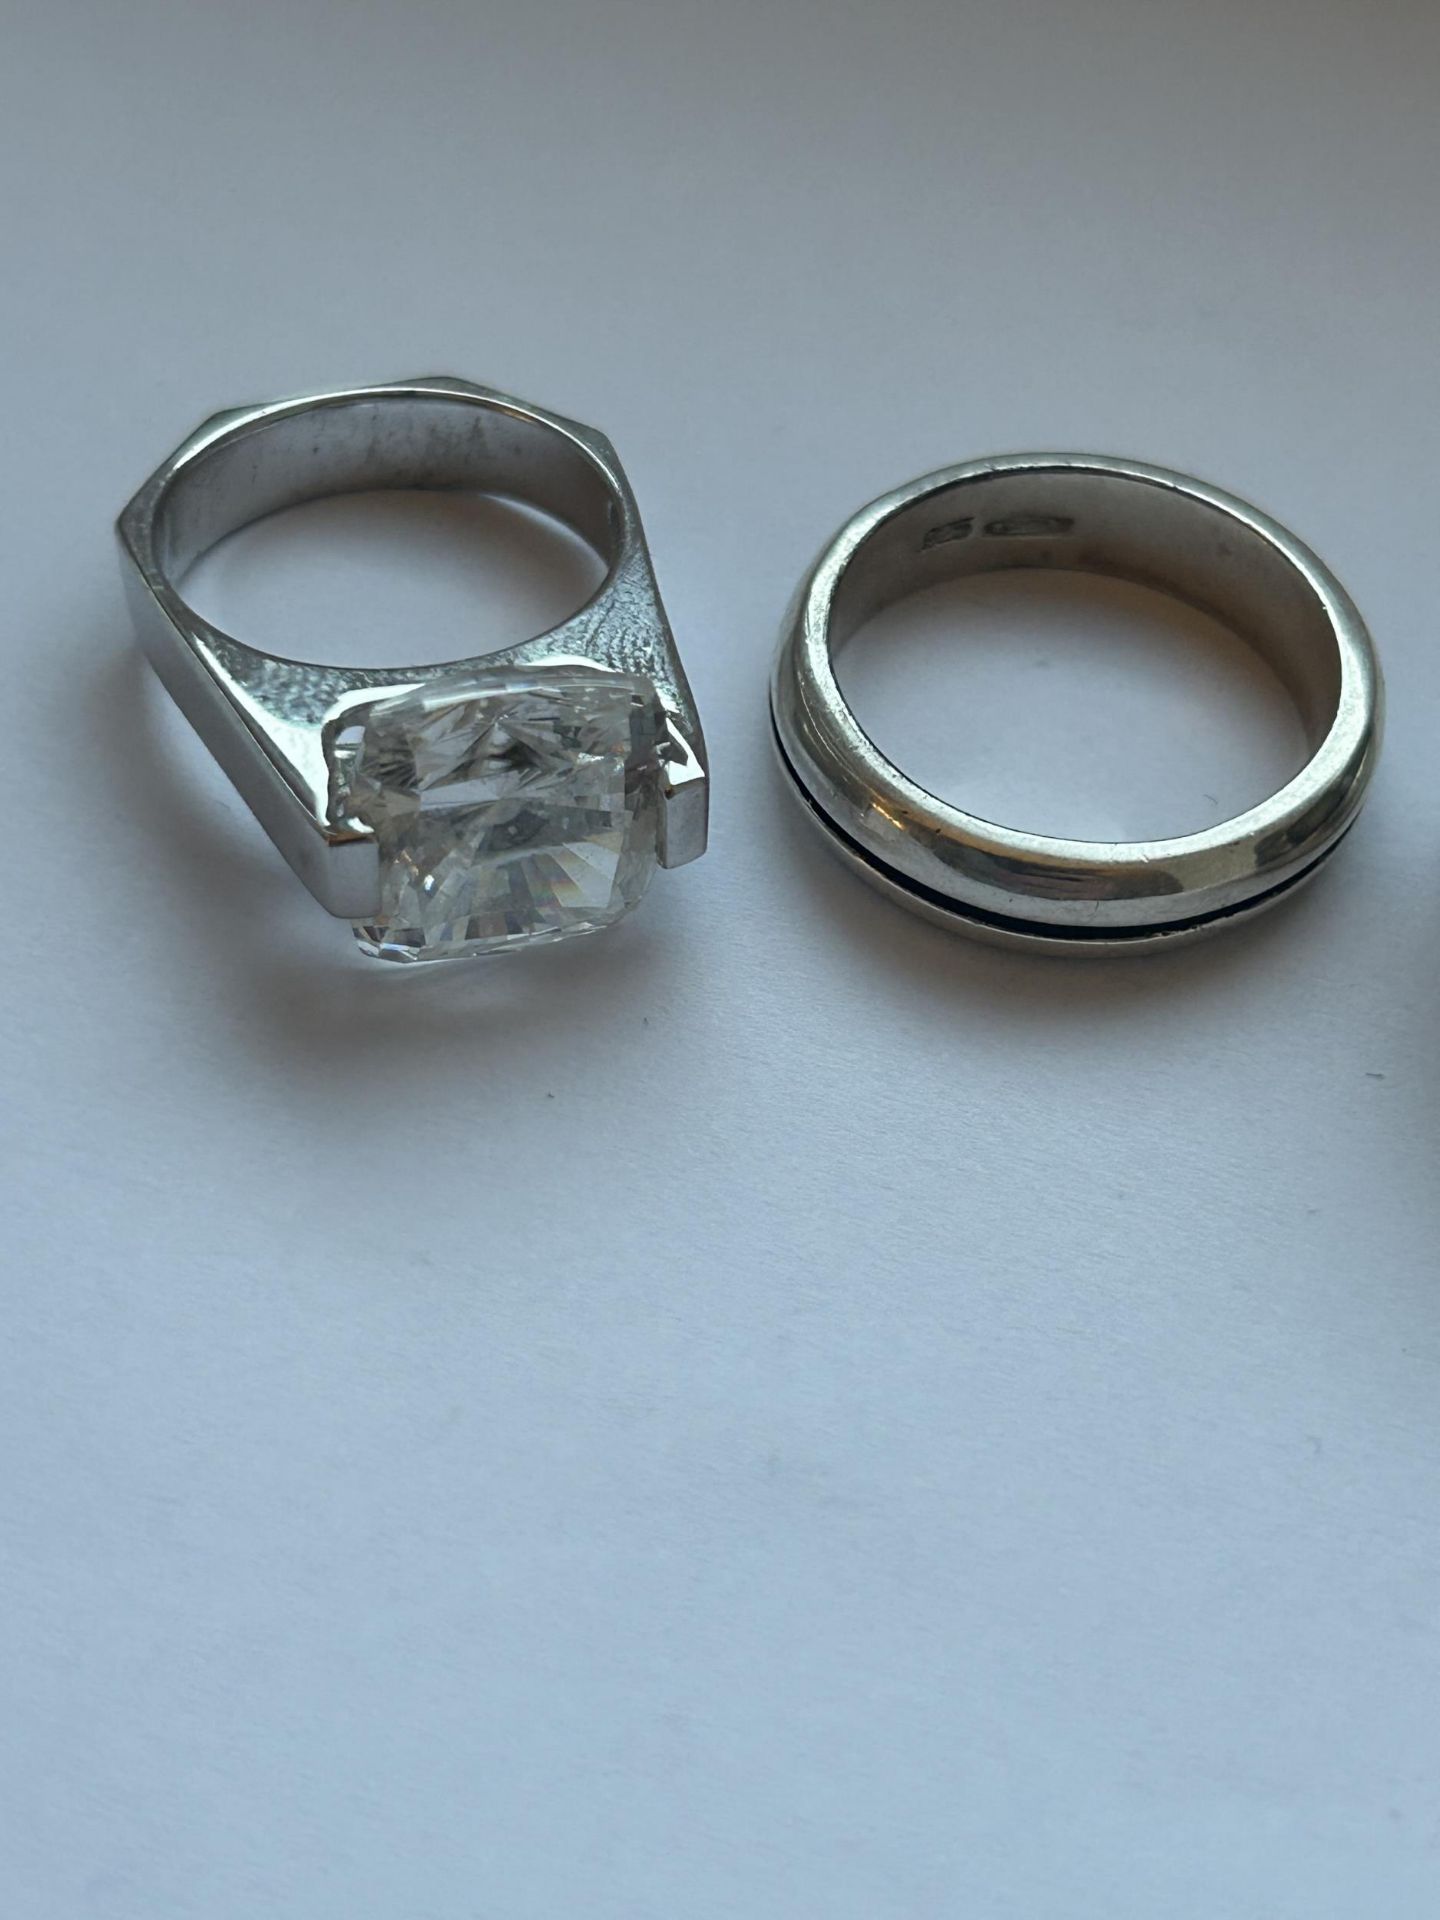 FOUR SILVER DRESS RINGS GROSS WEIGHT 40.46 GRAMS - Image 3 of 3